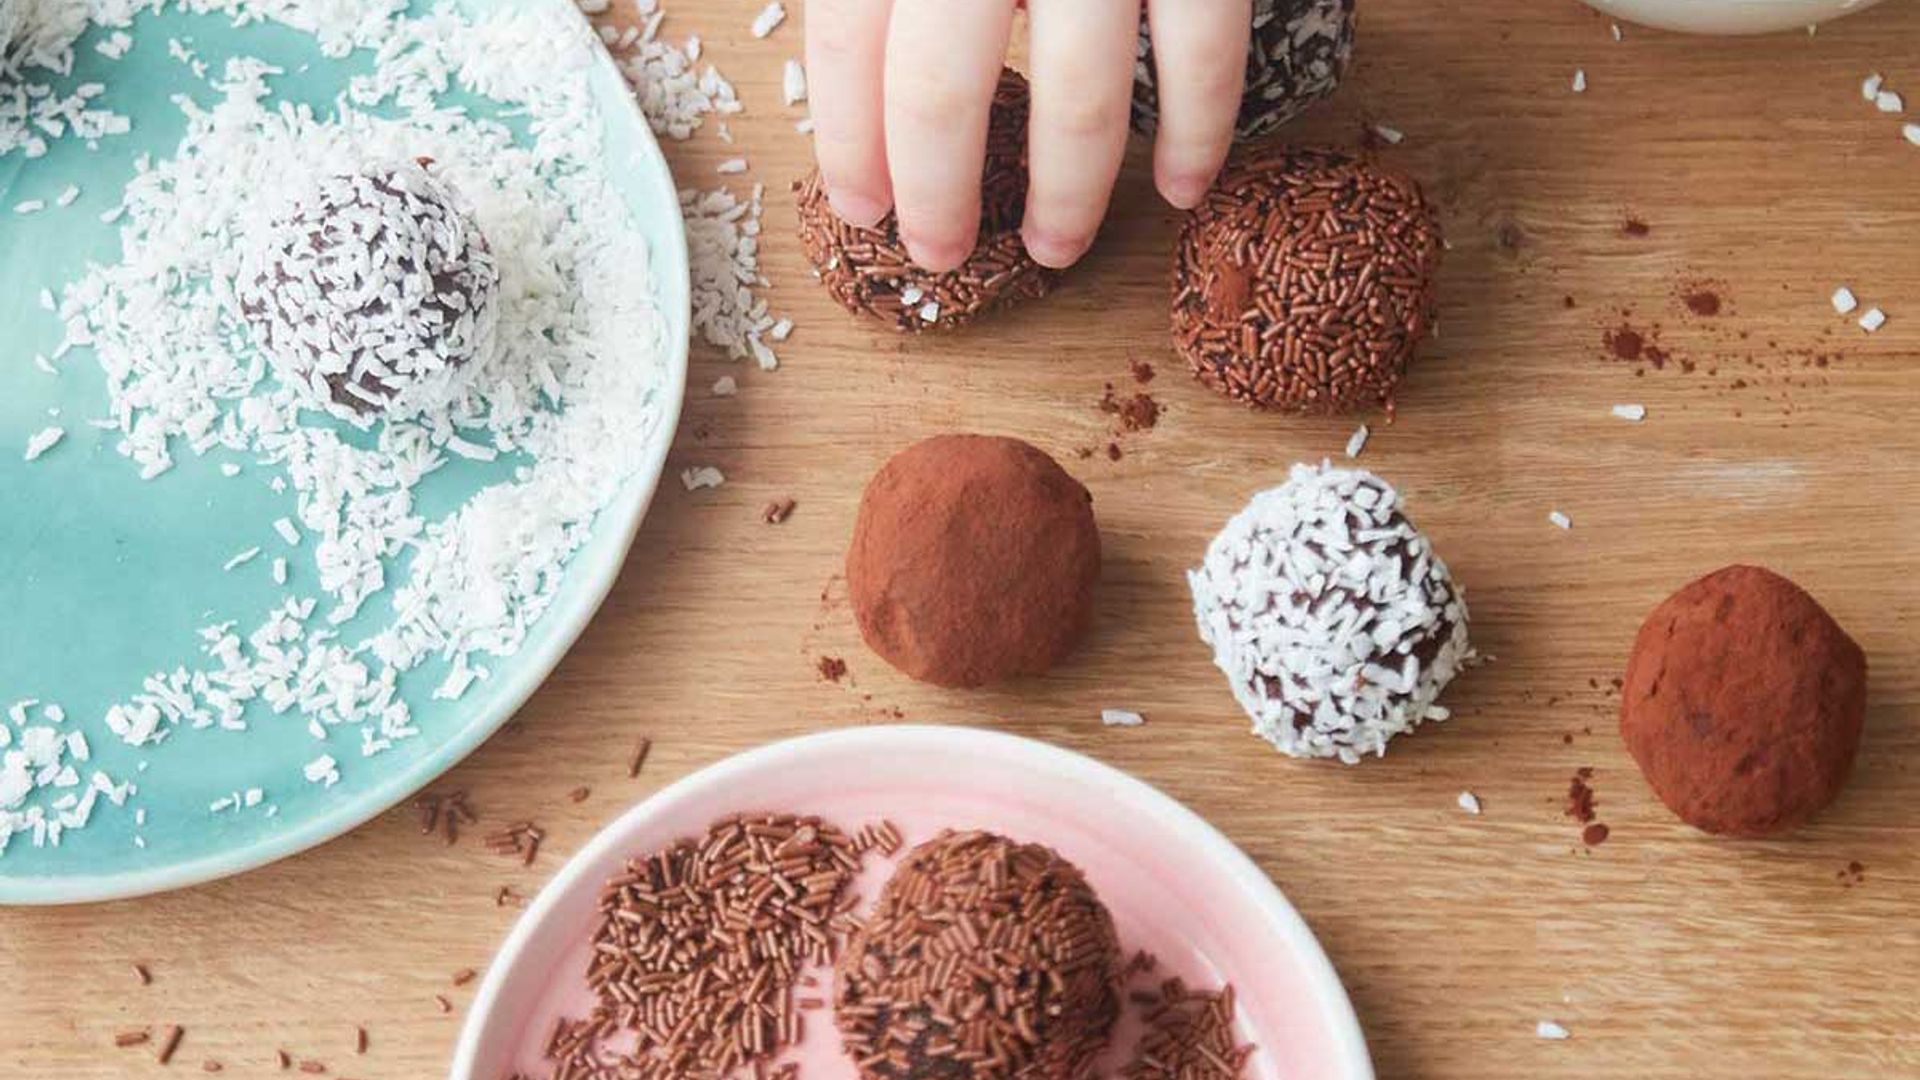 These no-sugar chocolate energy balls are vegan, healthy and guilt-free!